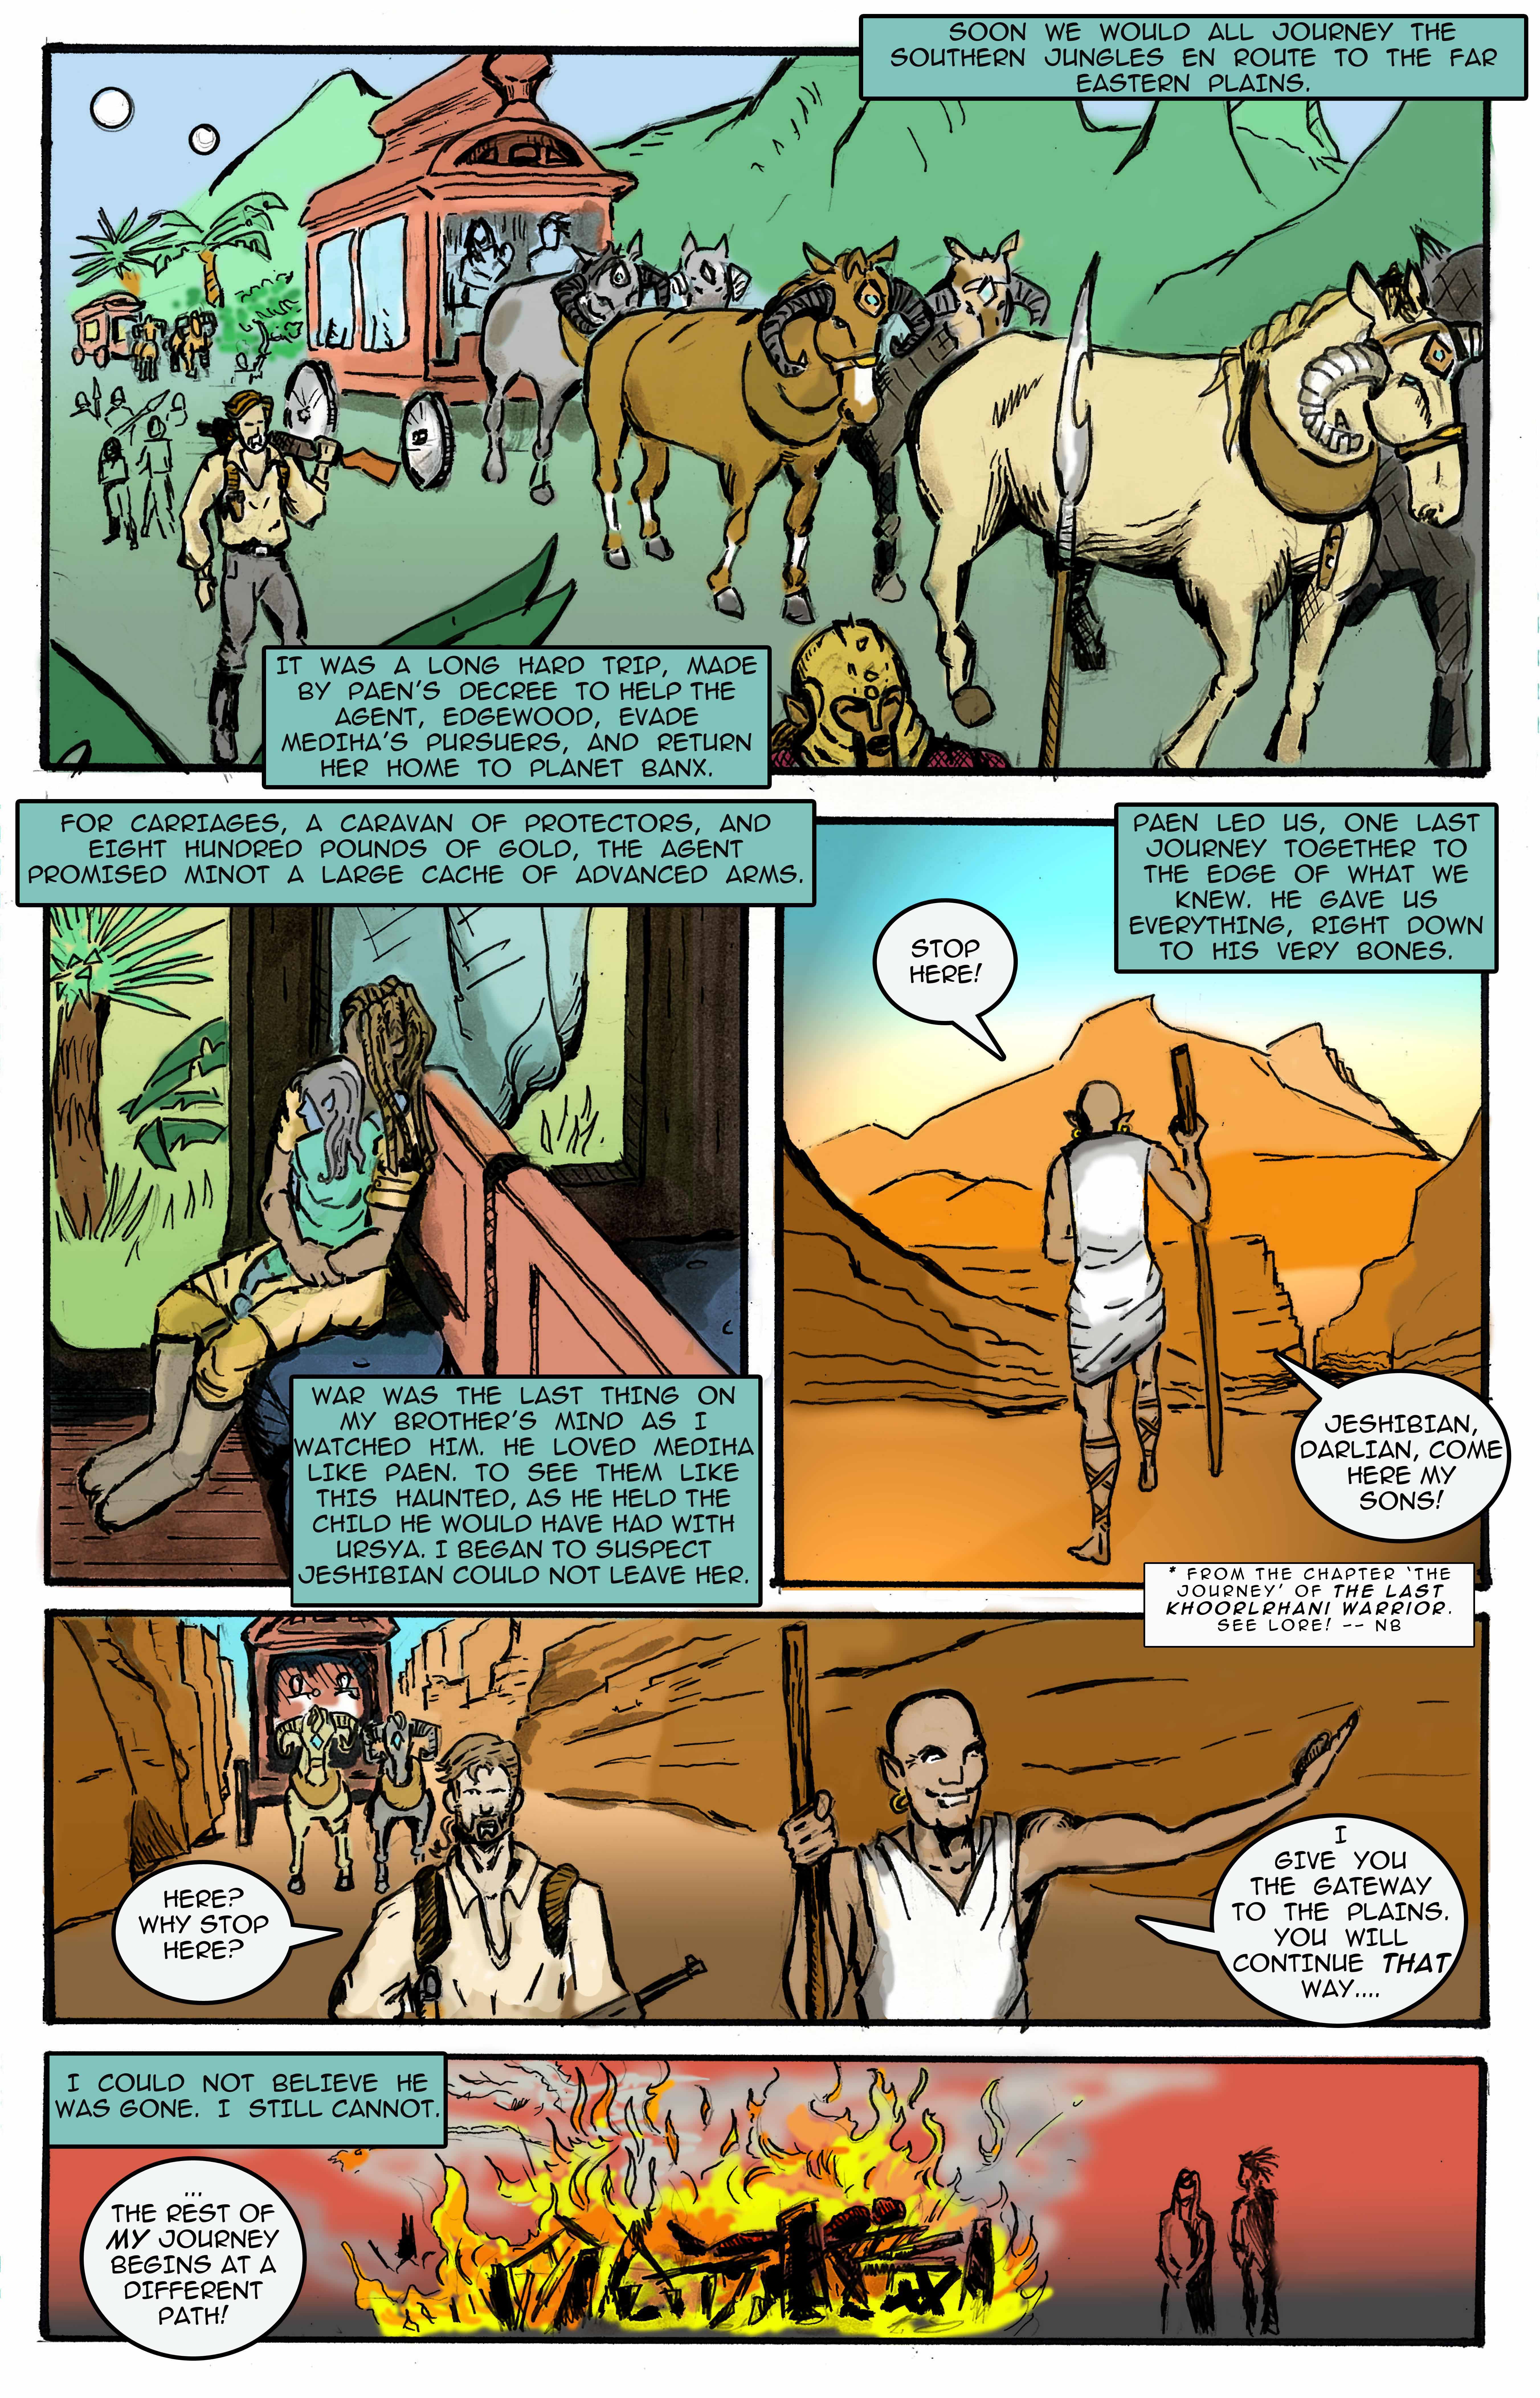 Dreamers of the Great One Land (page 26)